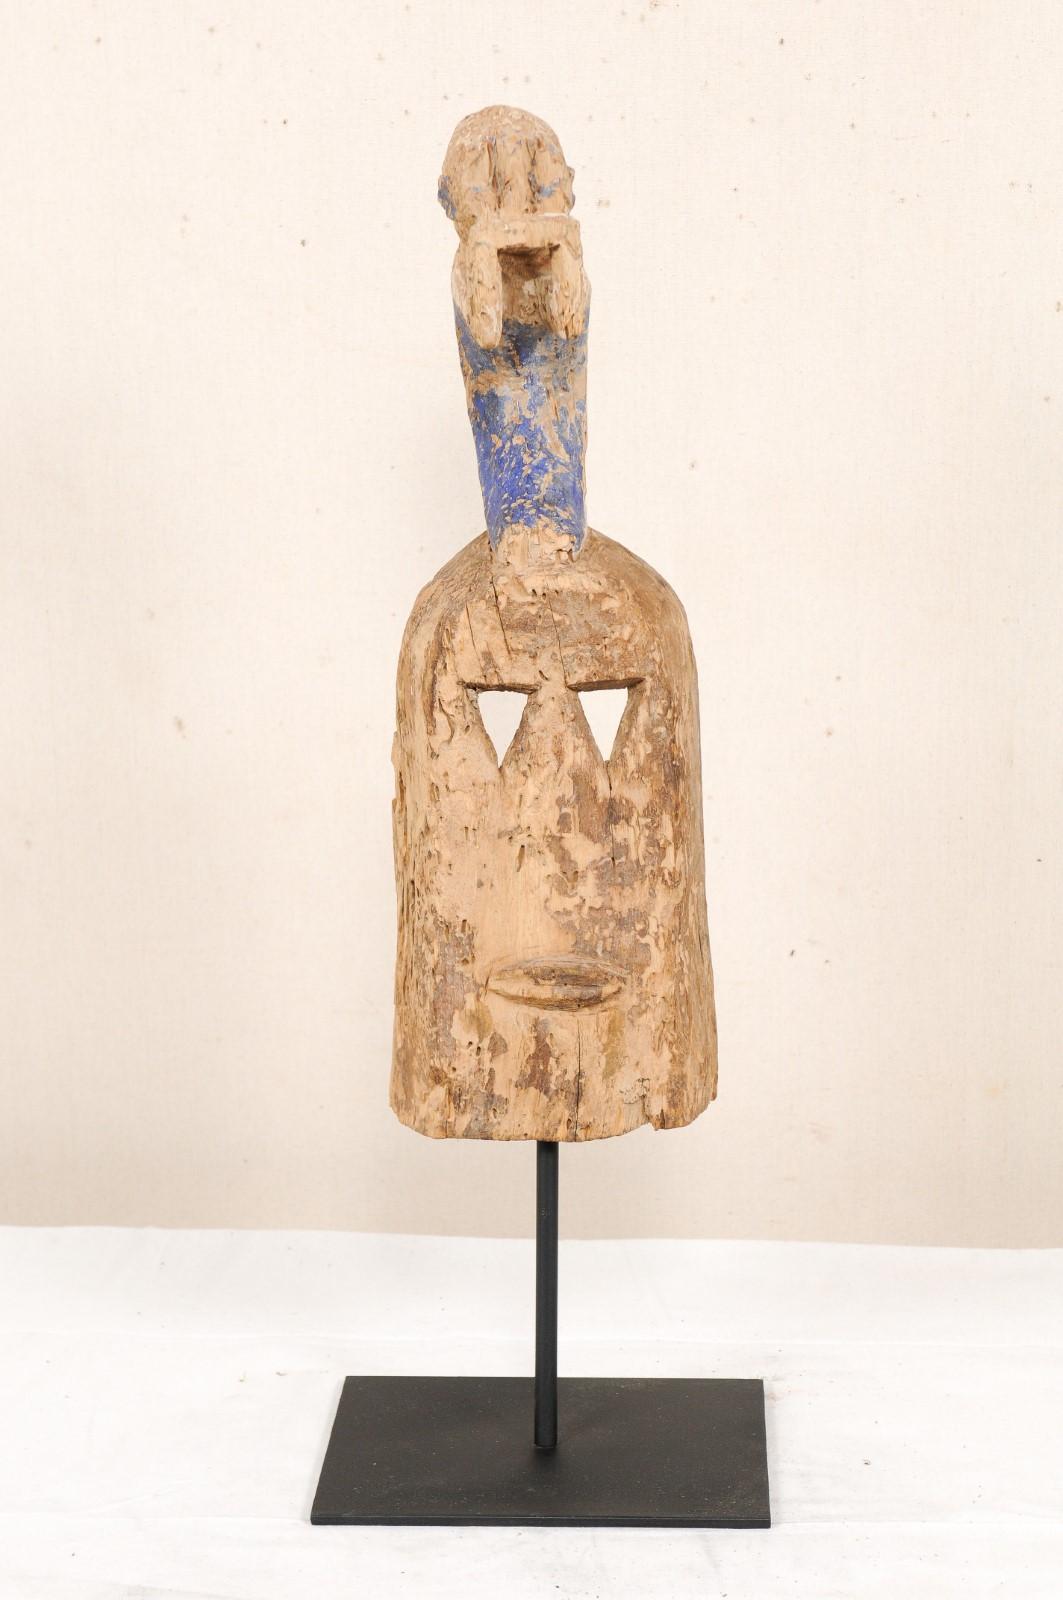 A Dogon Mali dance mask with carved figure from the early to mid 20th century. This Dogon tribal wooden ceremonial dance mask originates from Mali, West Africa. The mask is hand-carved and features a face with triangular eye holes, which is topped